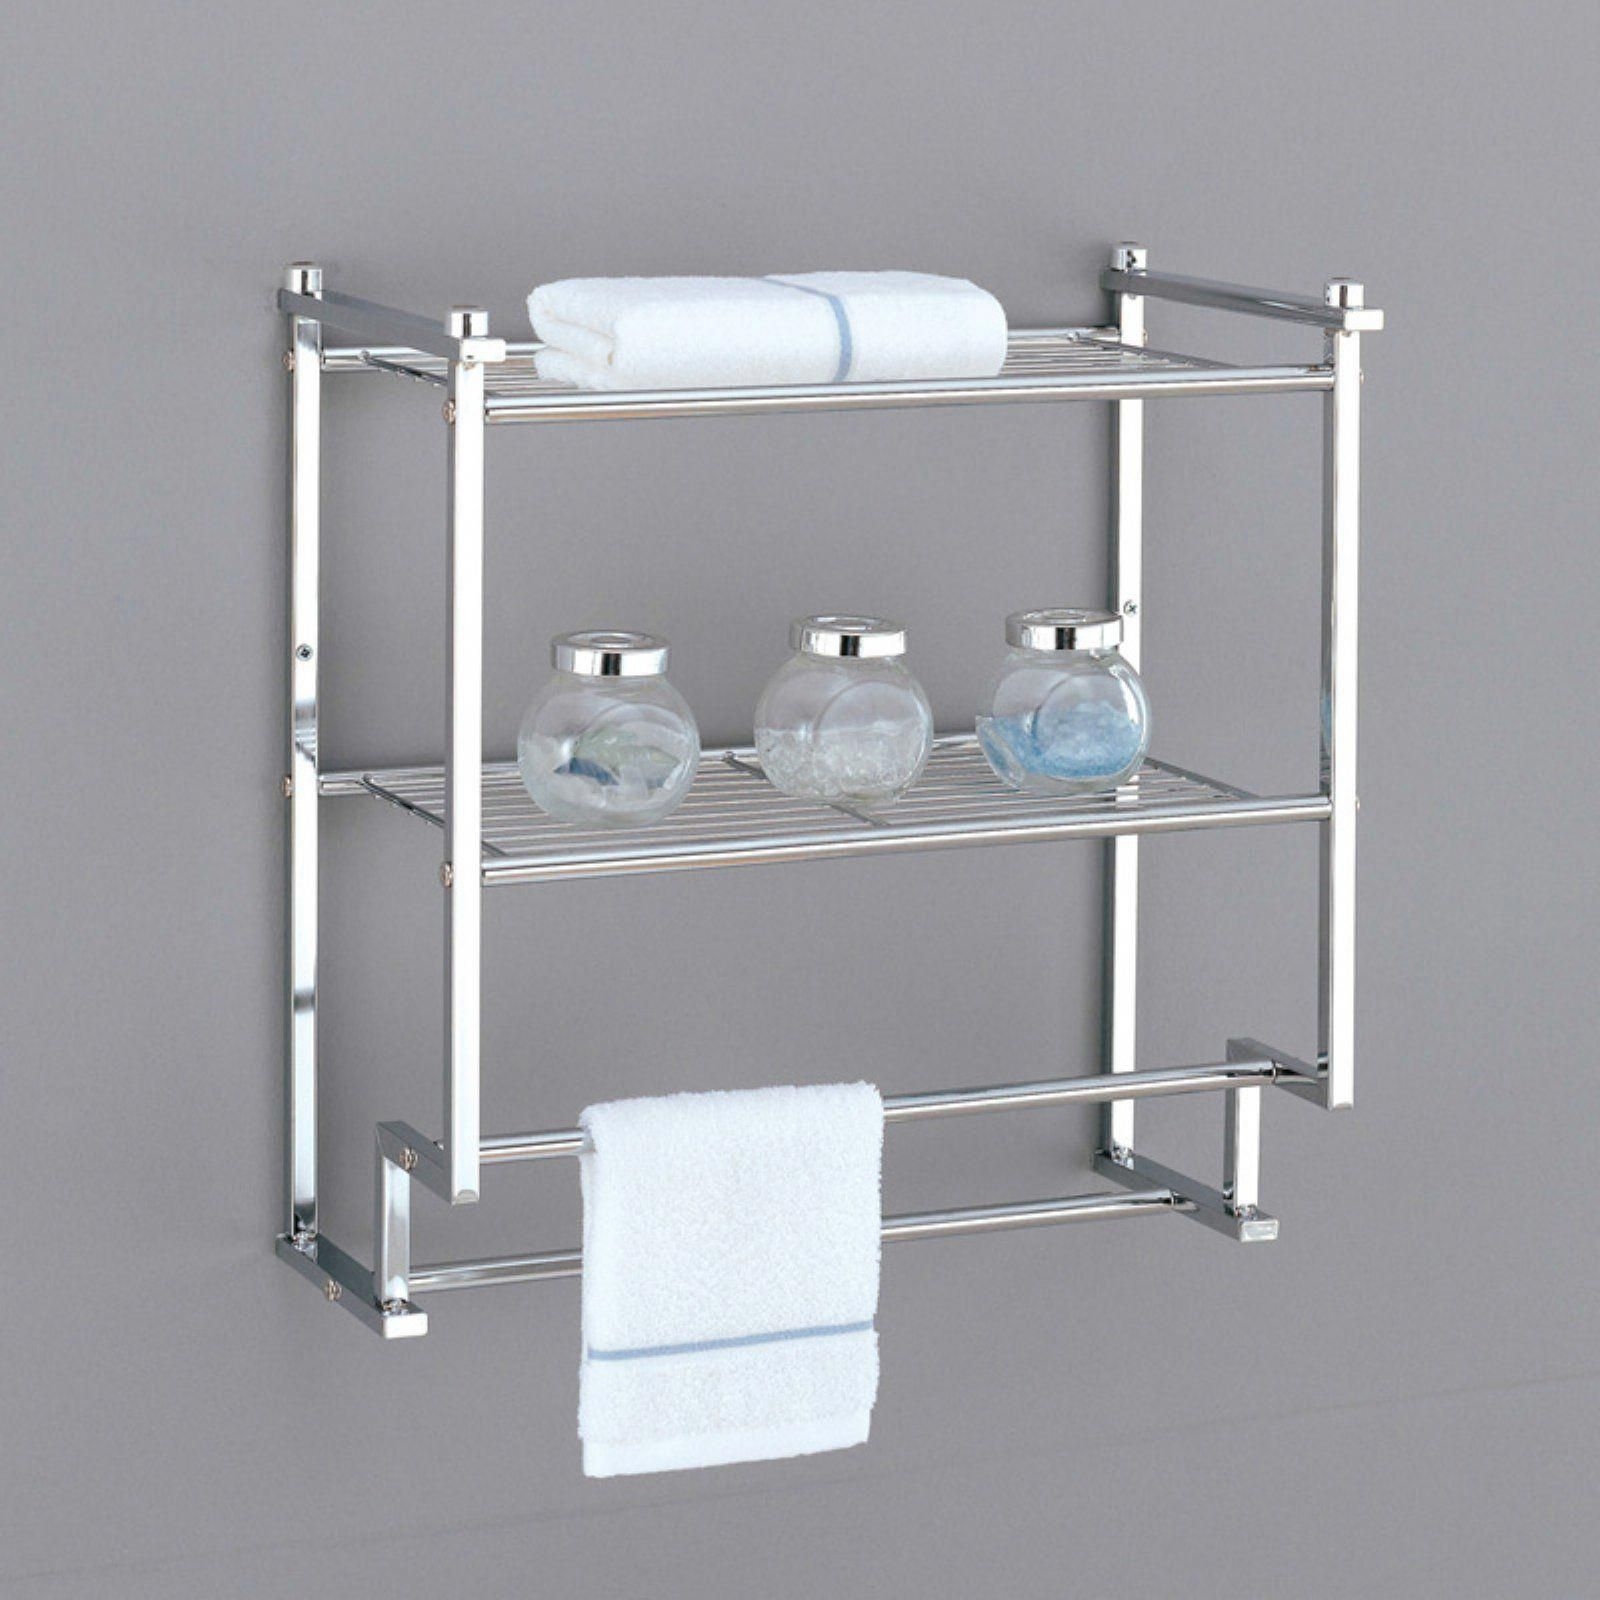 Organize It All Organize It All 16988W-1 2 Tier Wall Mounted Rack with Towel Bars